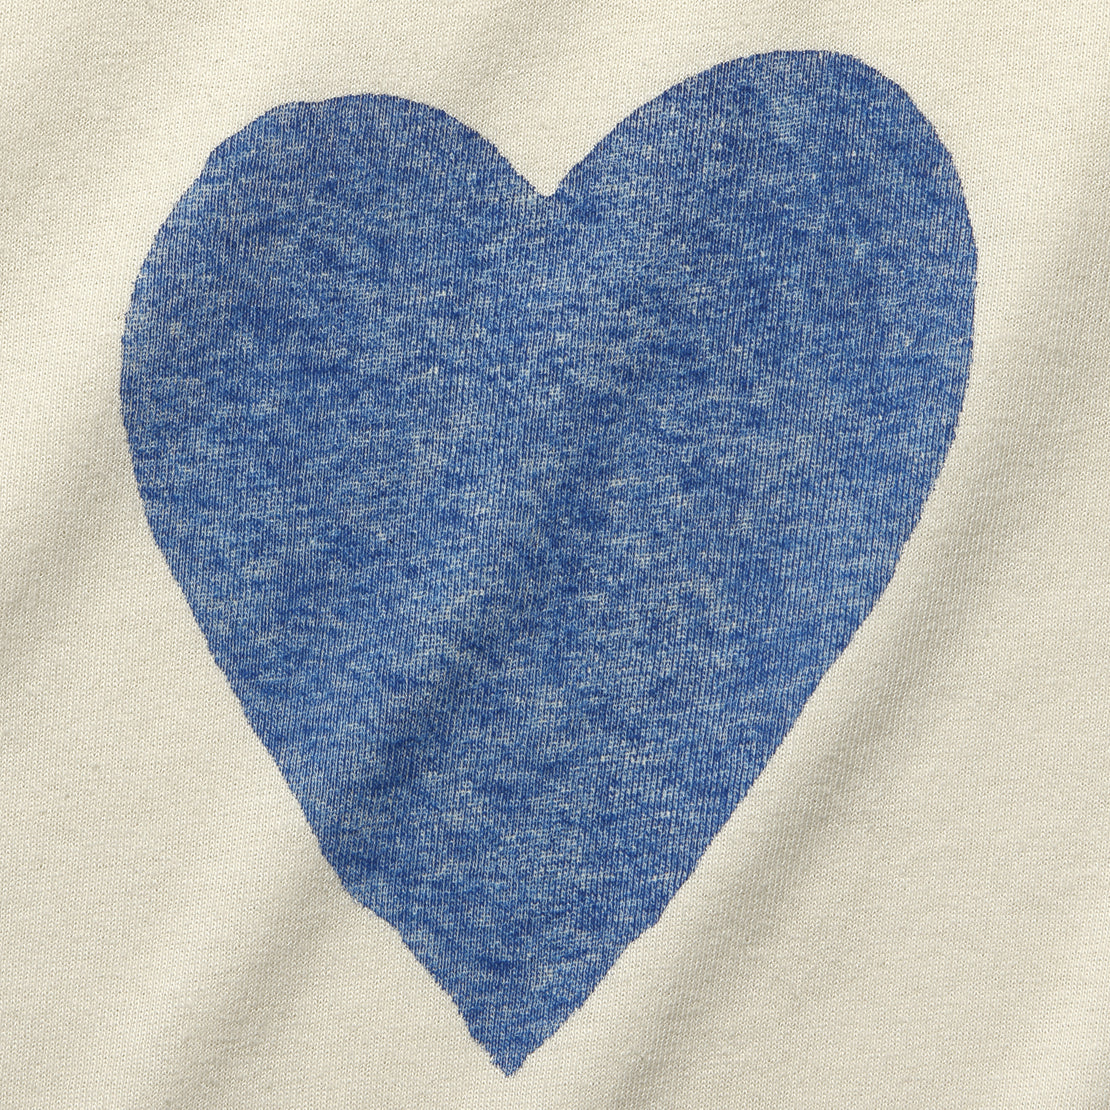 Heart Tee - Vintage White/Blue - Imogene + Willie - STAG Provisions - Tops - S/S Tee